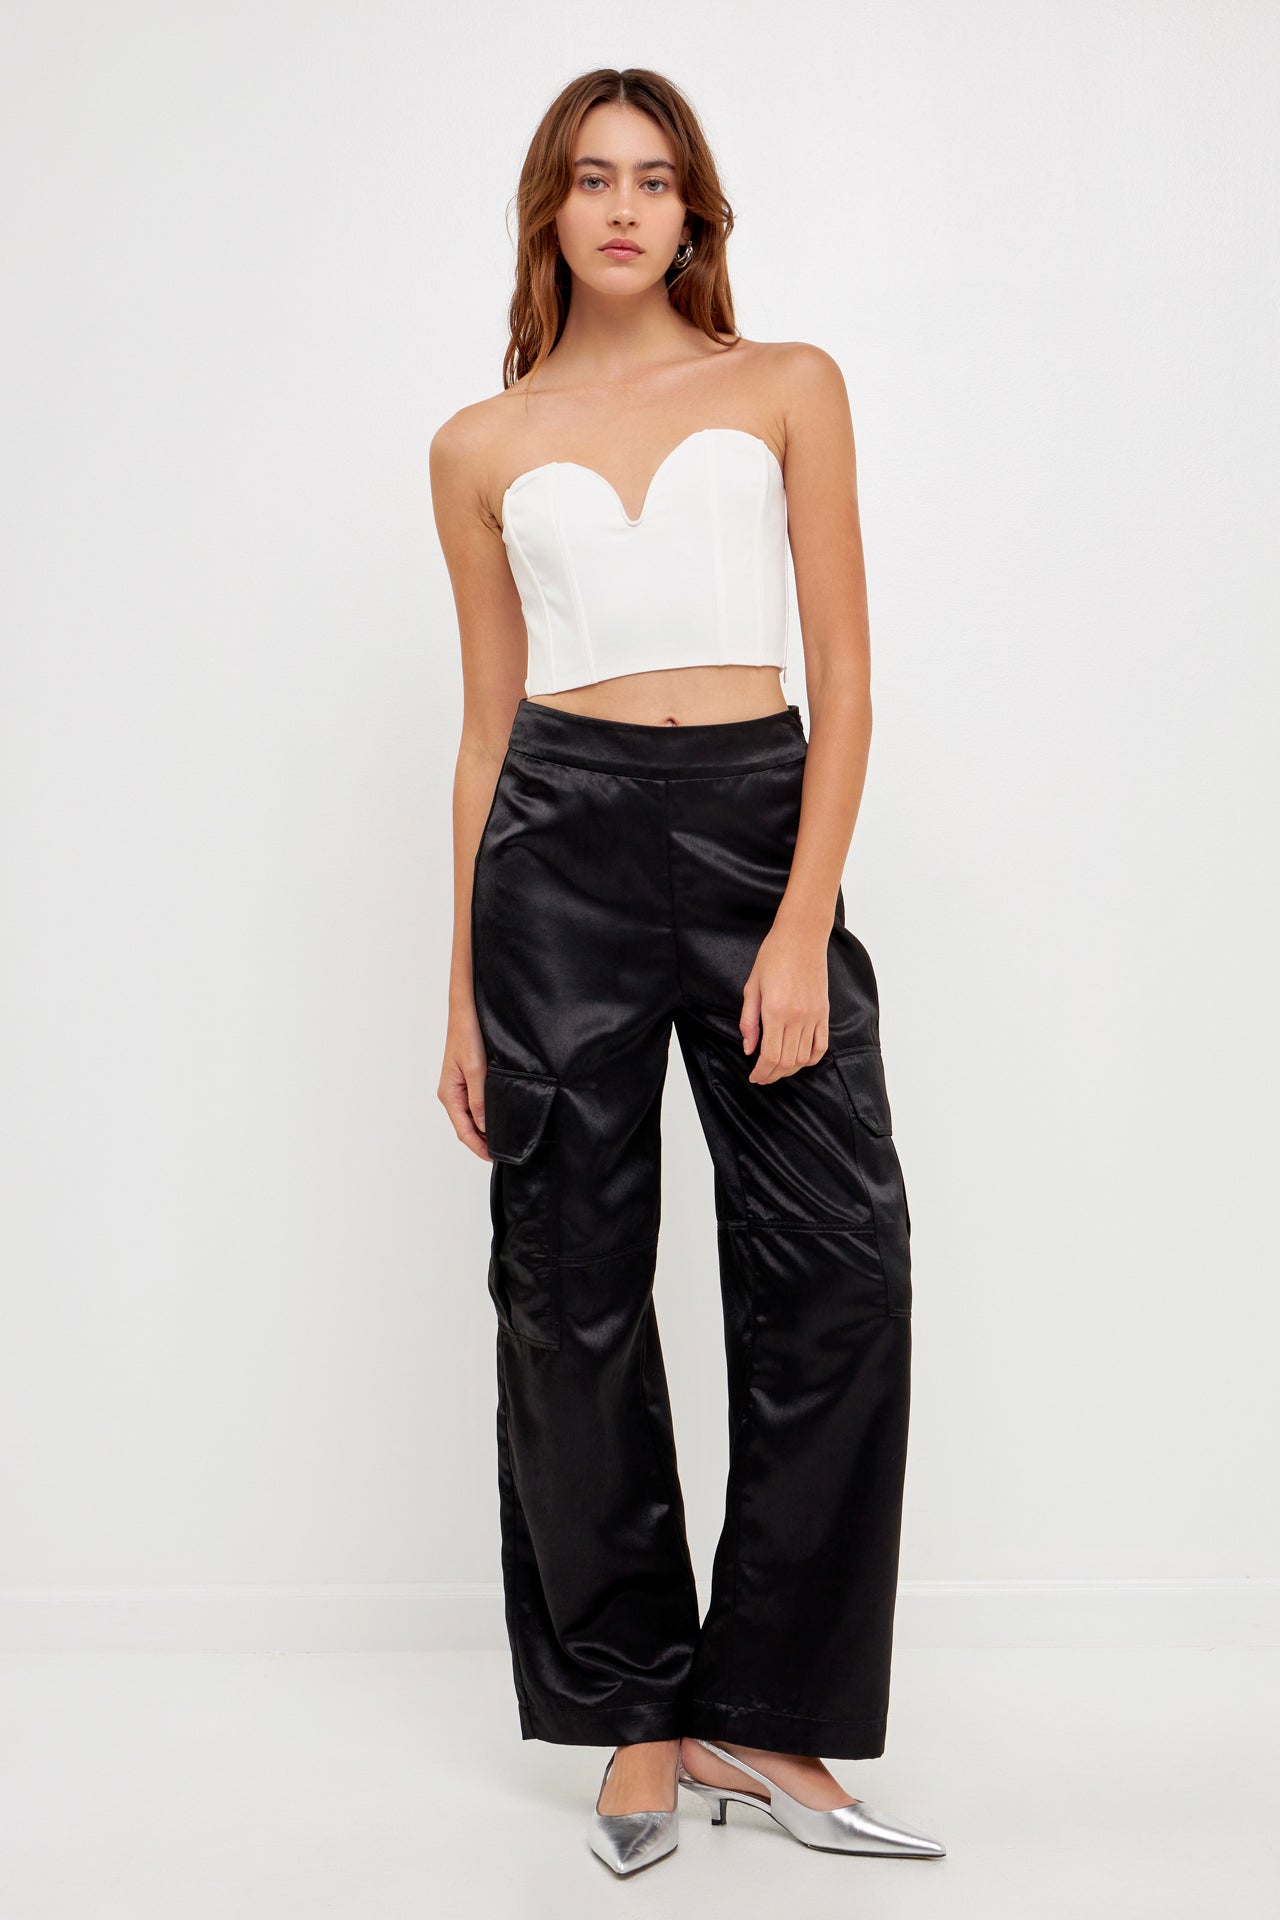 GREY LAB-Straight-Leg Satin Cargo Pants-PANTS available at Objectrare